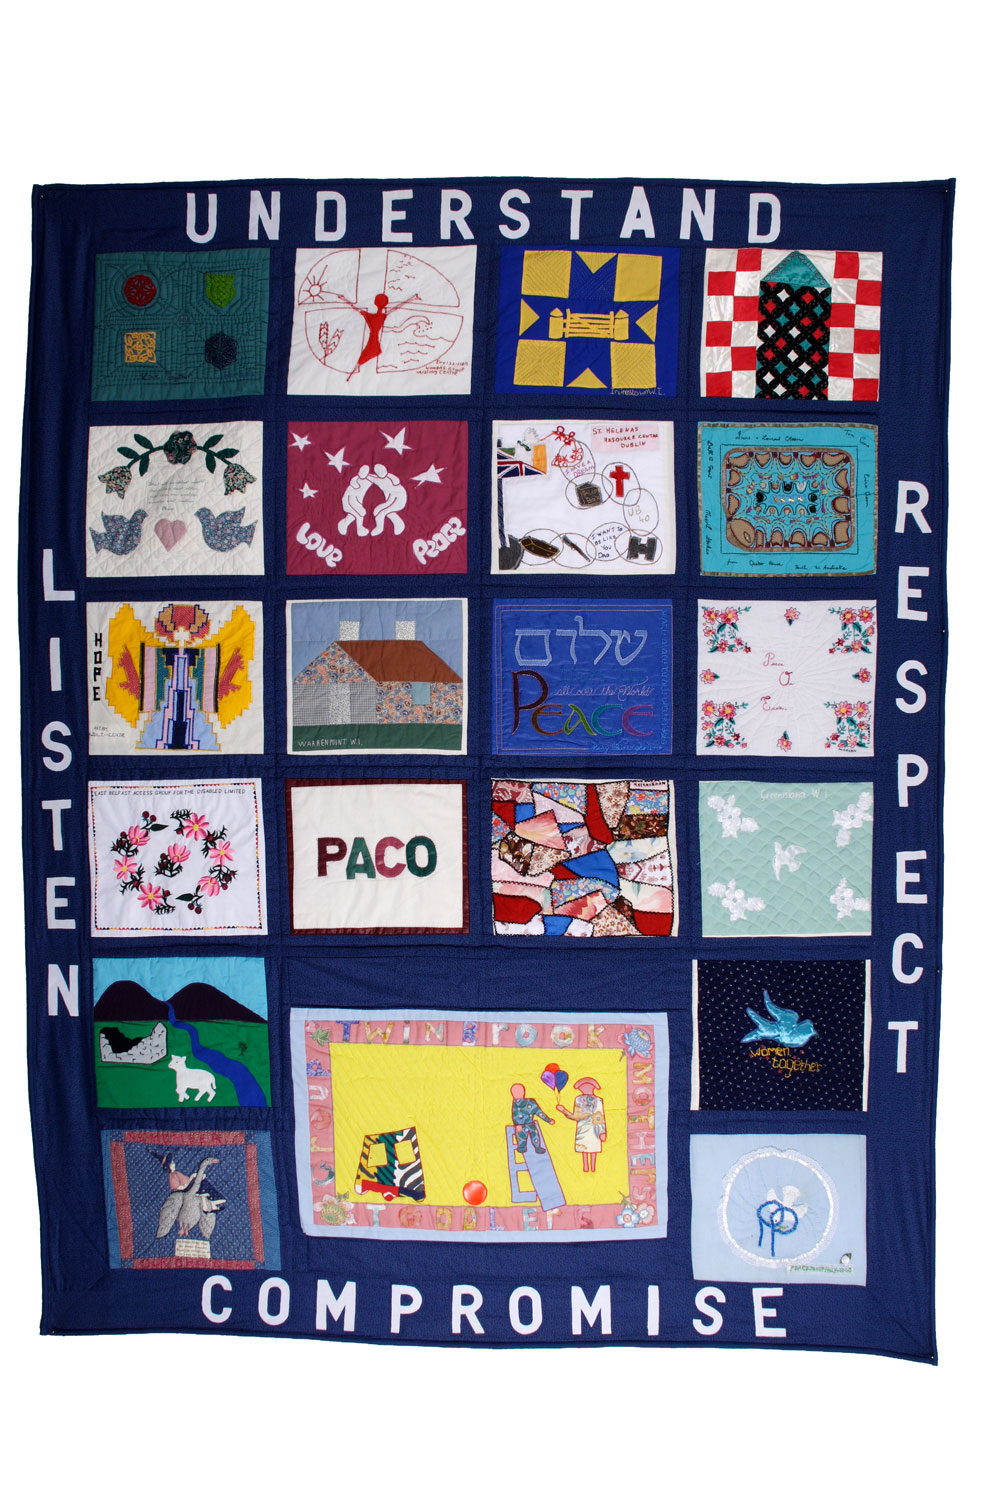 'Northern Ireland Reconciliation Quilt', by Women Together, Belfast. (Photo: Colin Peck)